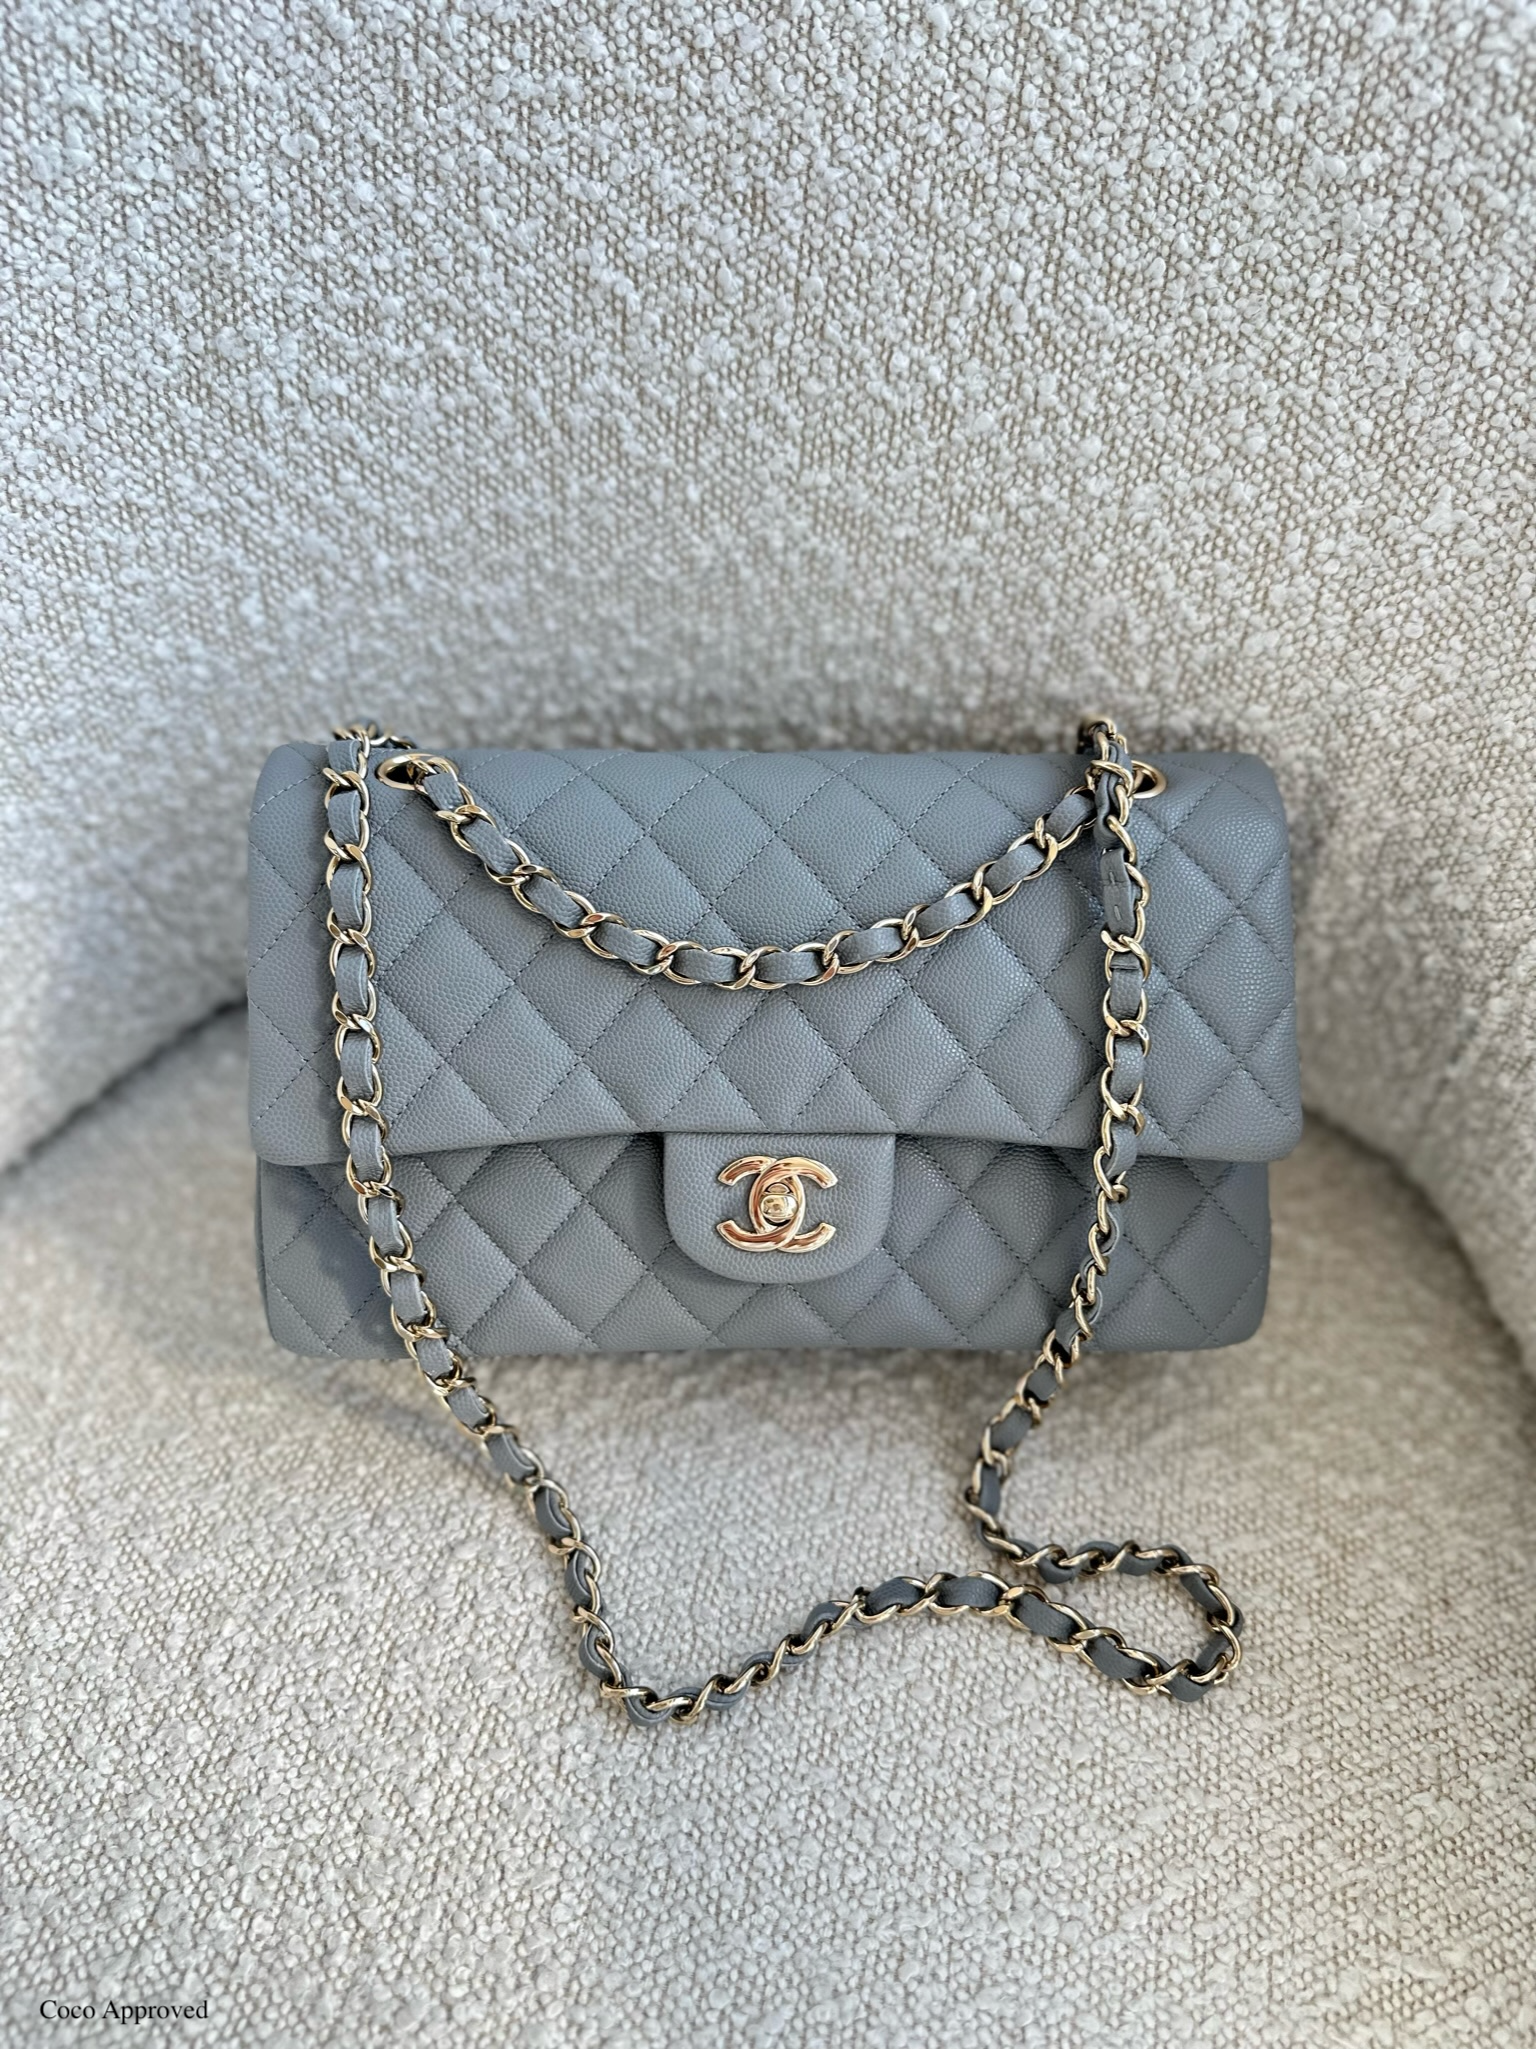 Gold hardware vs silver what do you prefer for classic chanel? What's more  timeless look? : r/chanel